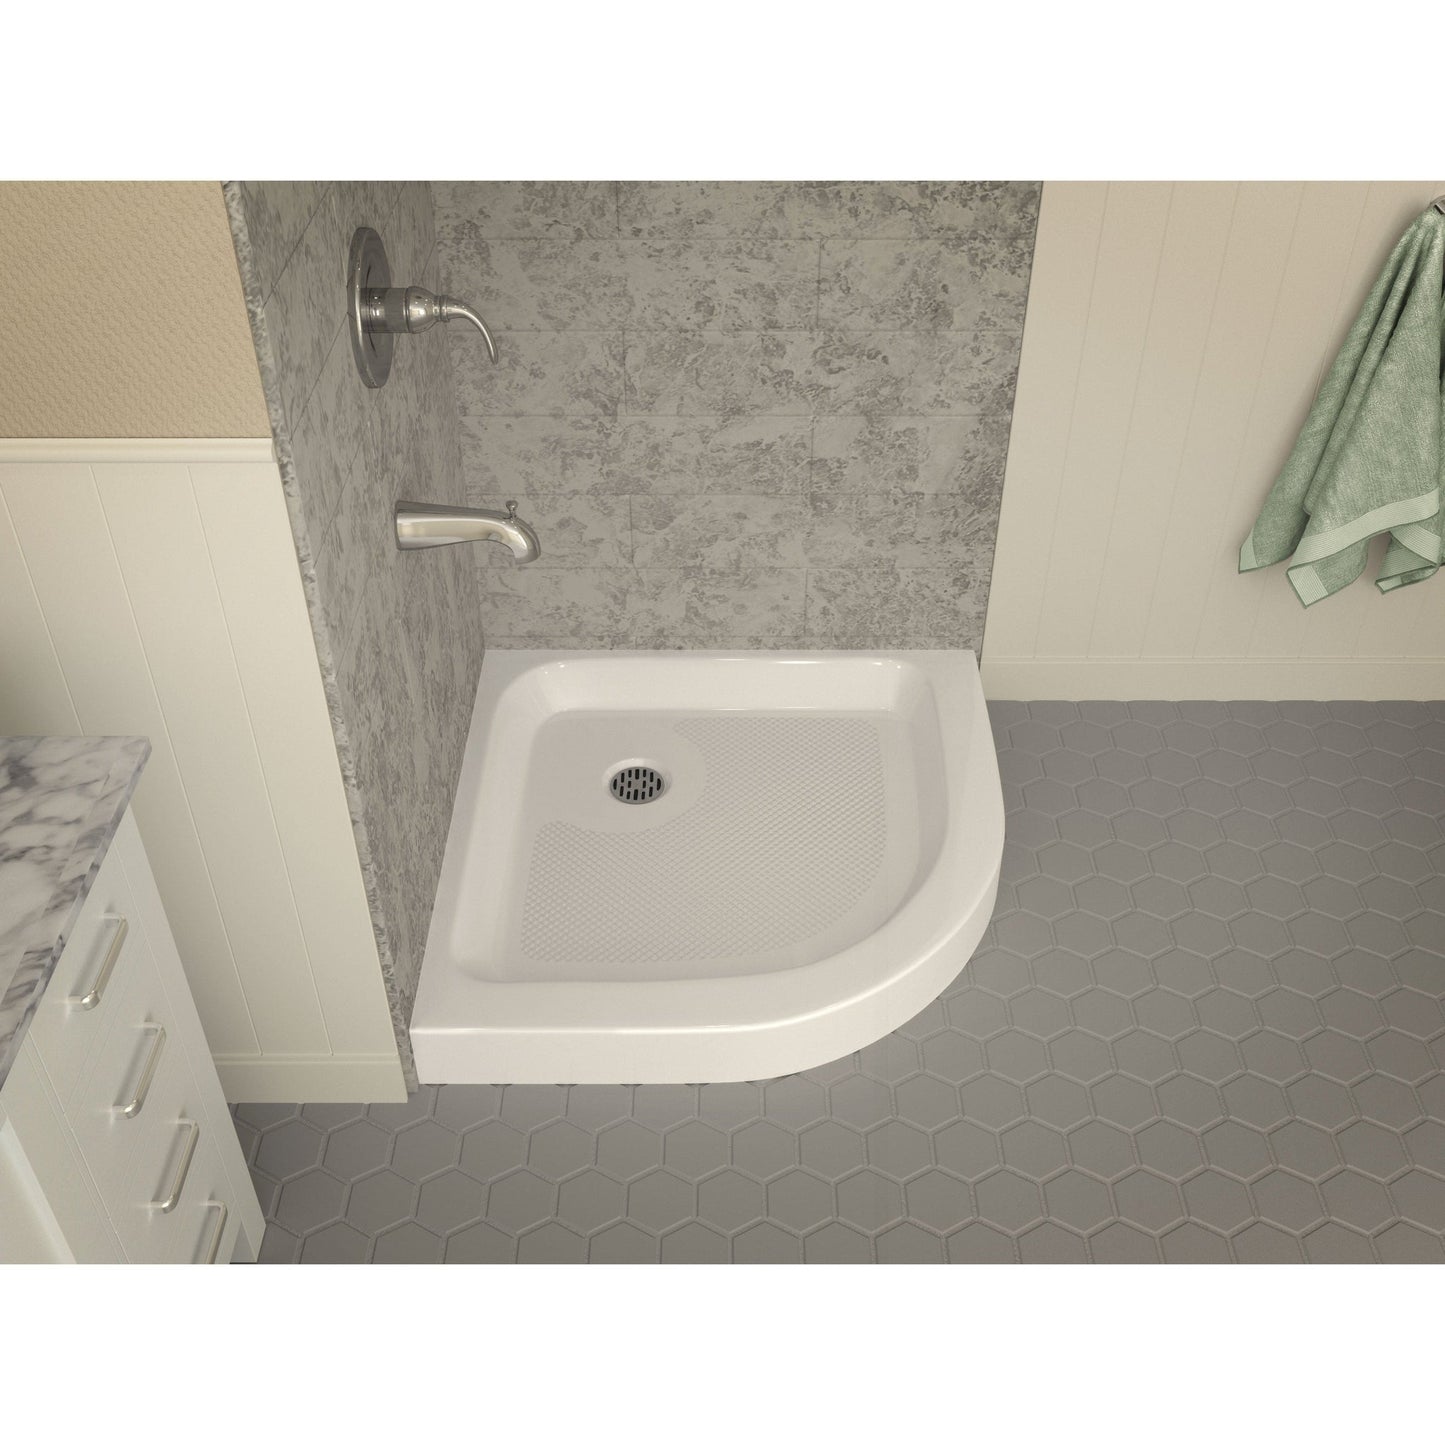 ANZZI Randi Series 32" x 32" Center Drain Neo-Round Double Threshold White Shower Base With Built-in Tile Flange